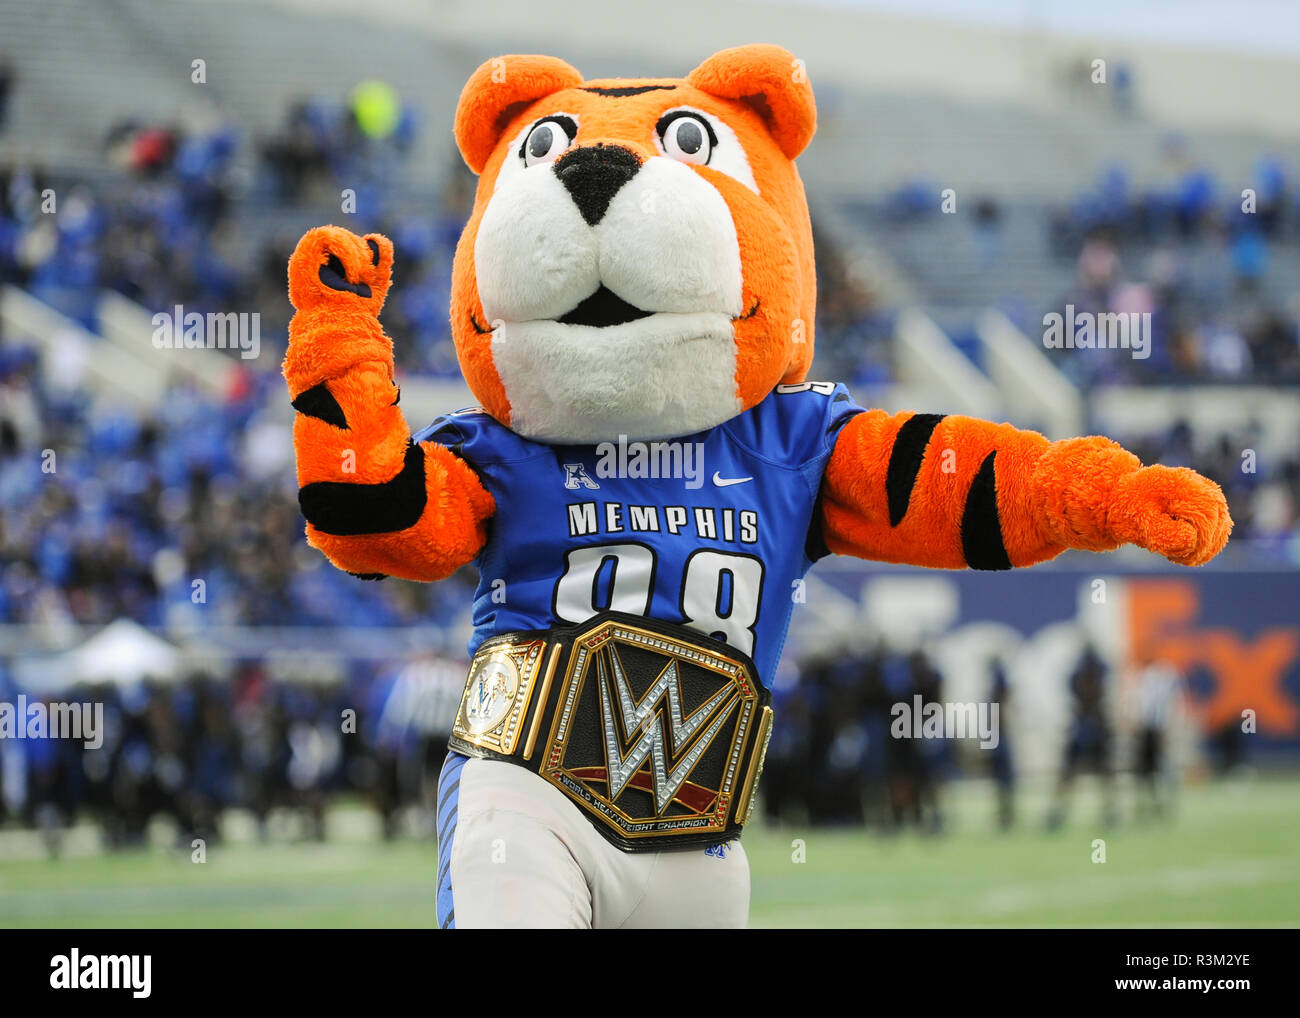 Memphis, TN, USA. 23rd Nov, 2018. The Memphis Tigers mascot, POUNCER,  wearing the championship belt after the NCAA Division I football game  between the University of Houston Cougars and the Memphis Tigers